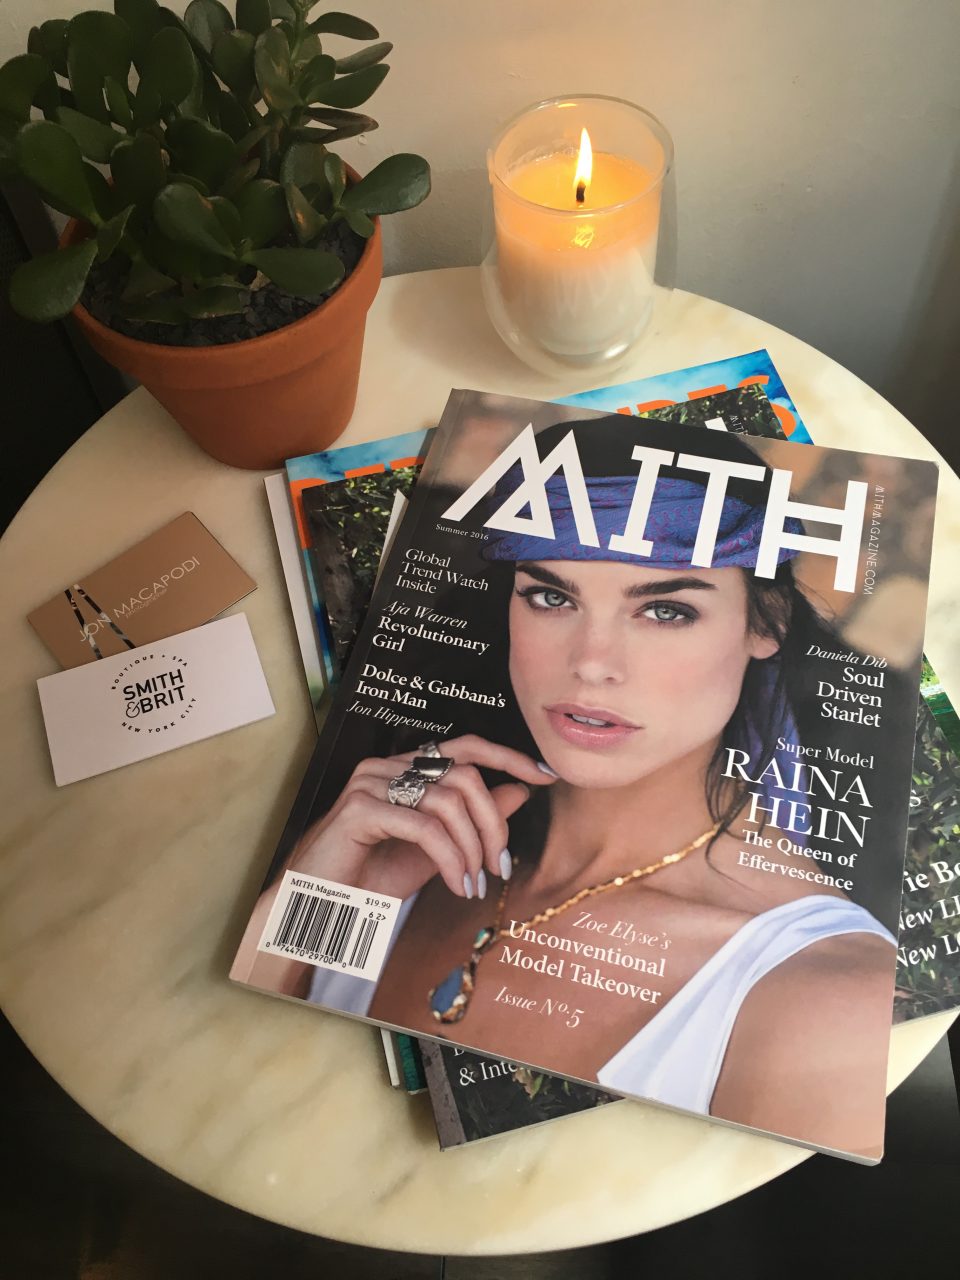 MITH_smith-brit-nyc_wellness_makeover_spa_IMG_7608